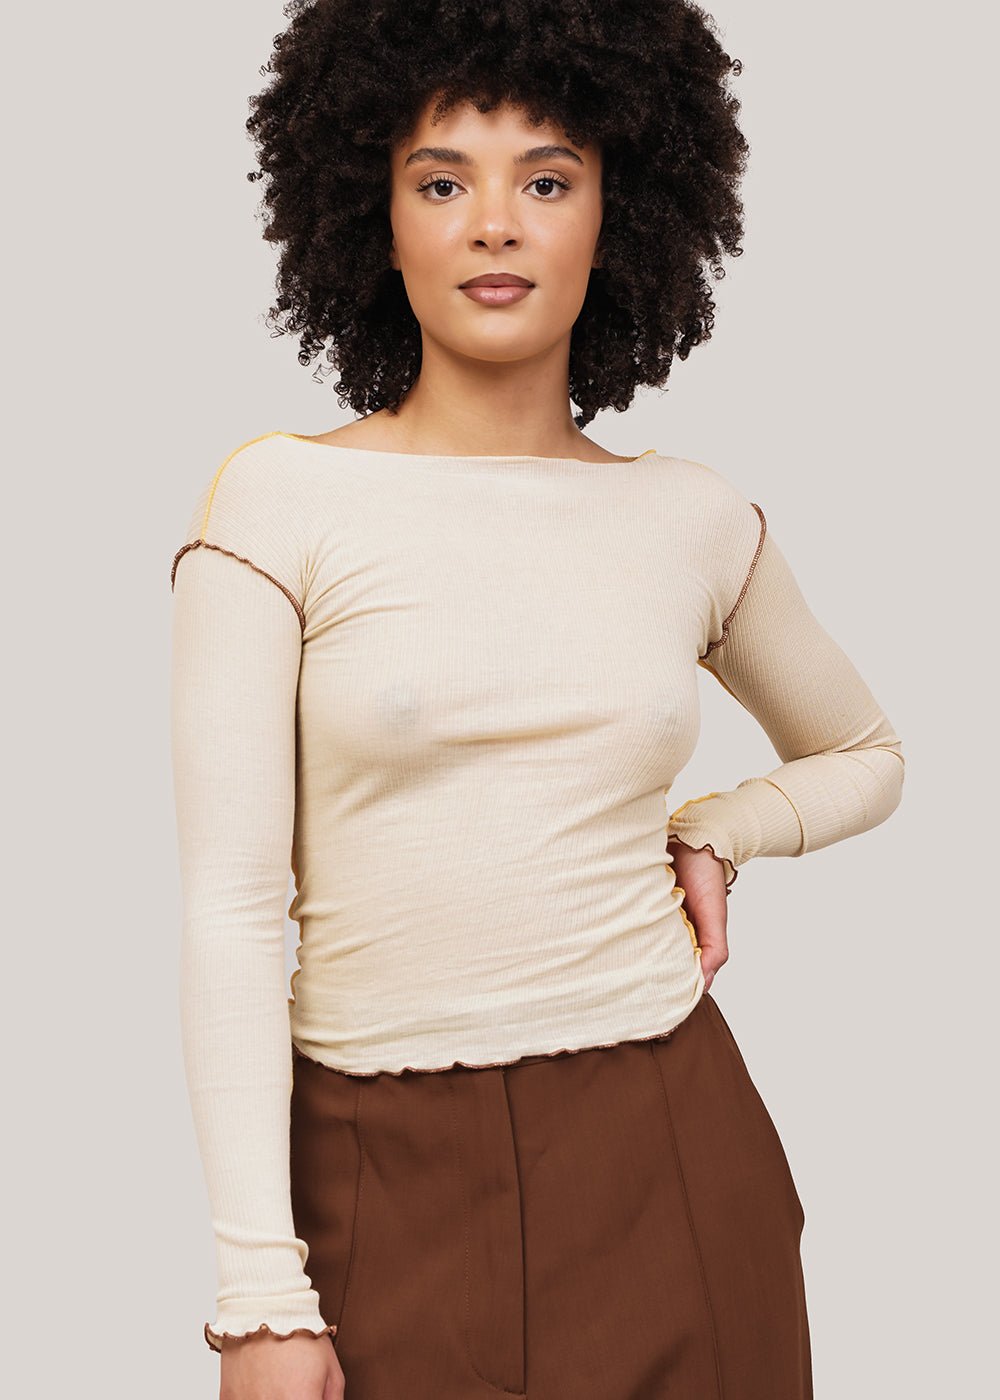 Round Sleeve Cropped Sweatshirt in Beige by AMOMENTO – New Classics Studios